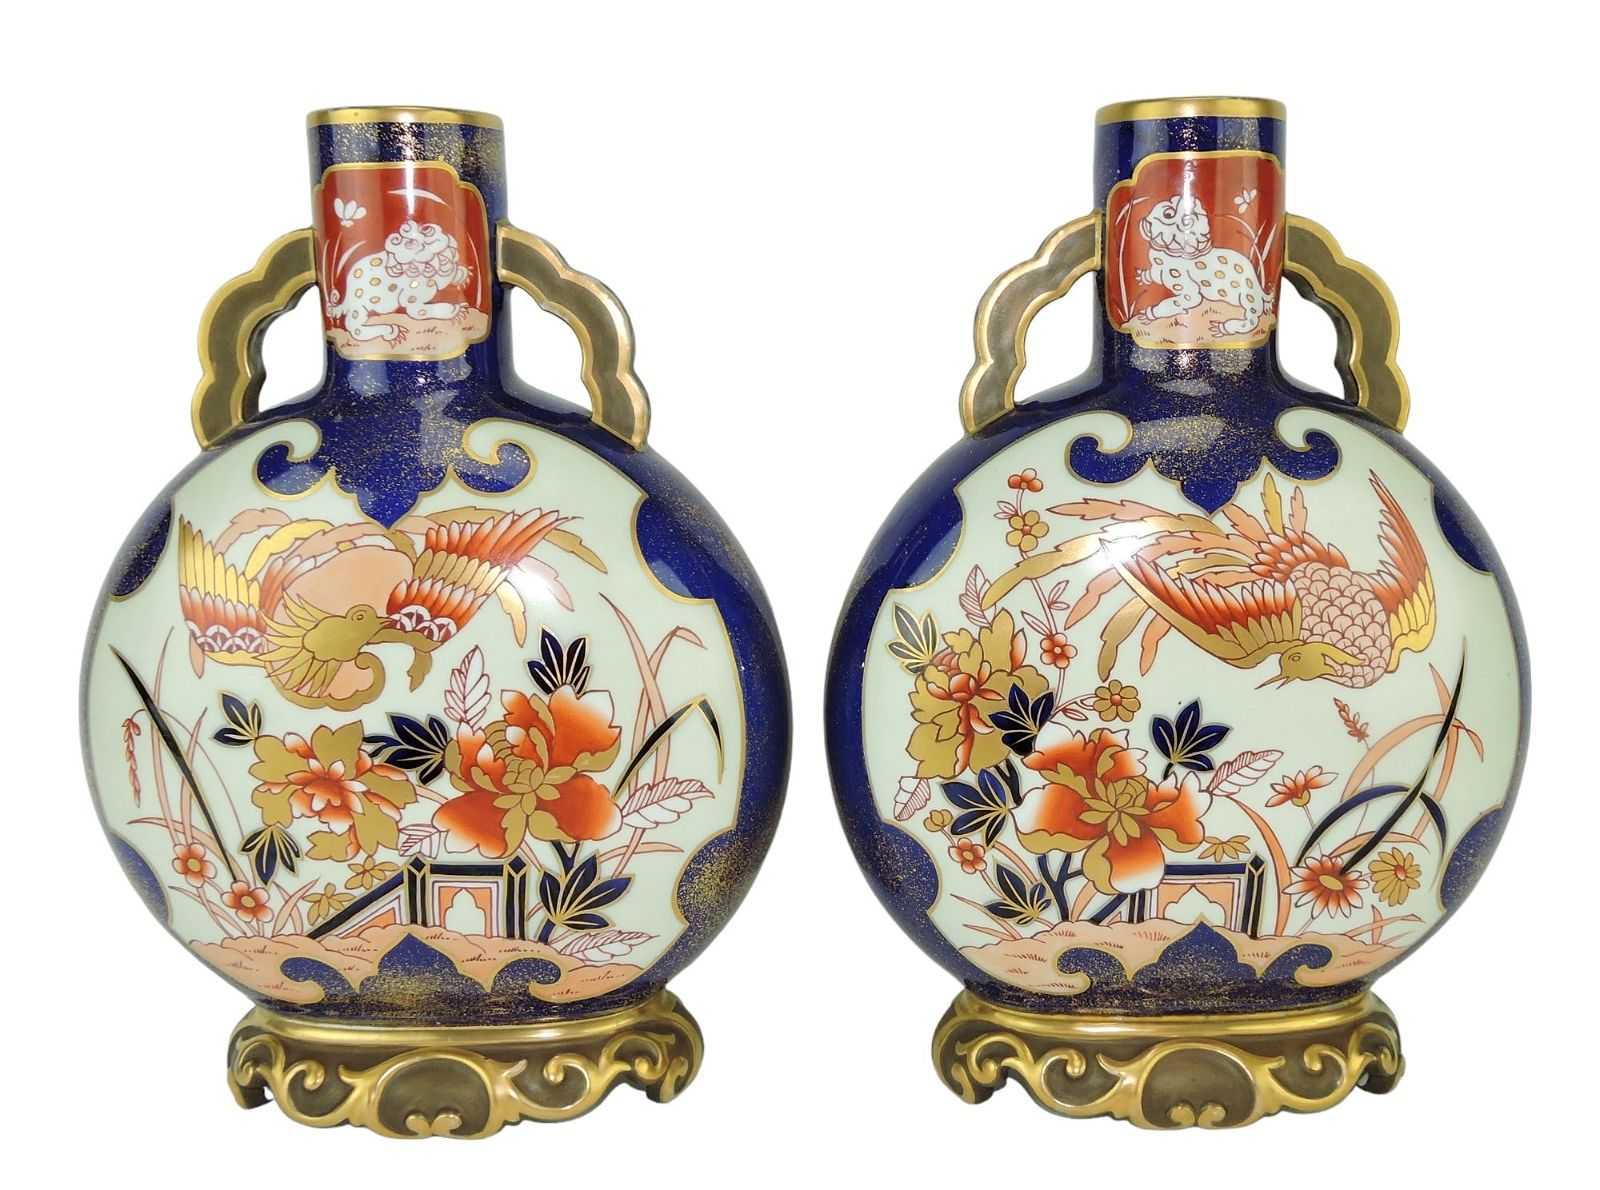 Circa-1875 pair of Royal Worcester Aesthetic movement moon flasks decorated in the Imari palette, estimated at $1,500-$2,500 at Strawser Auction Group.